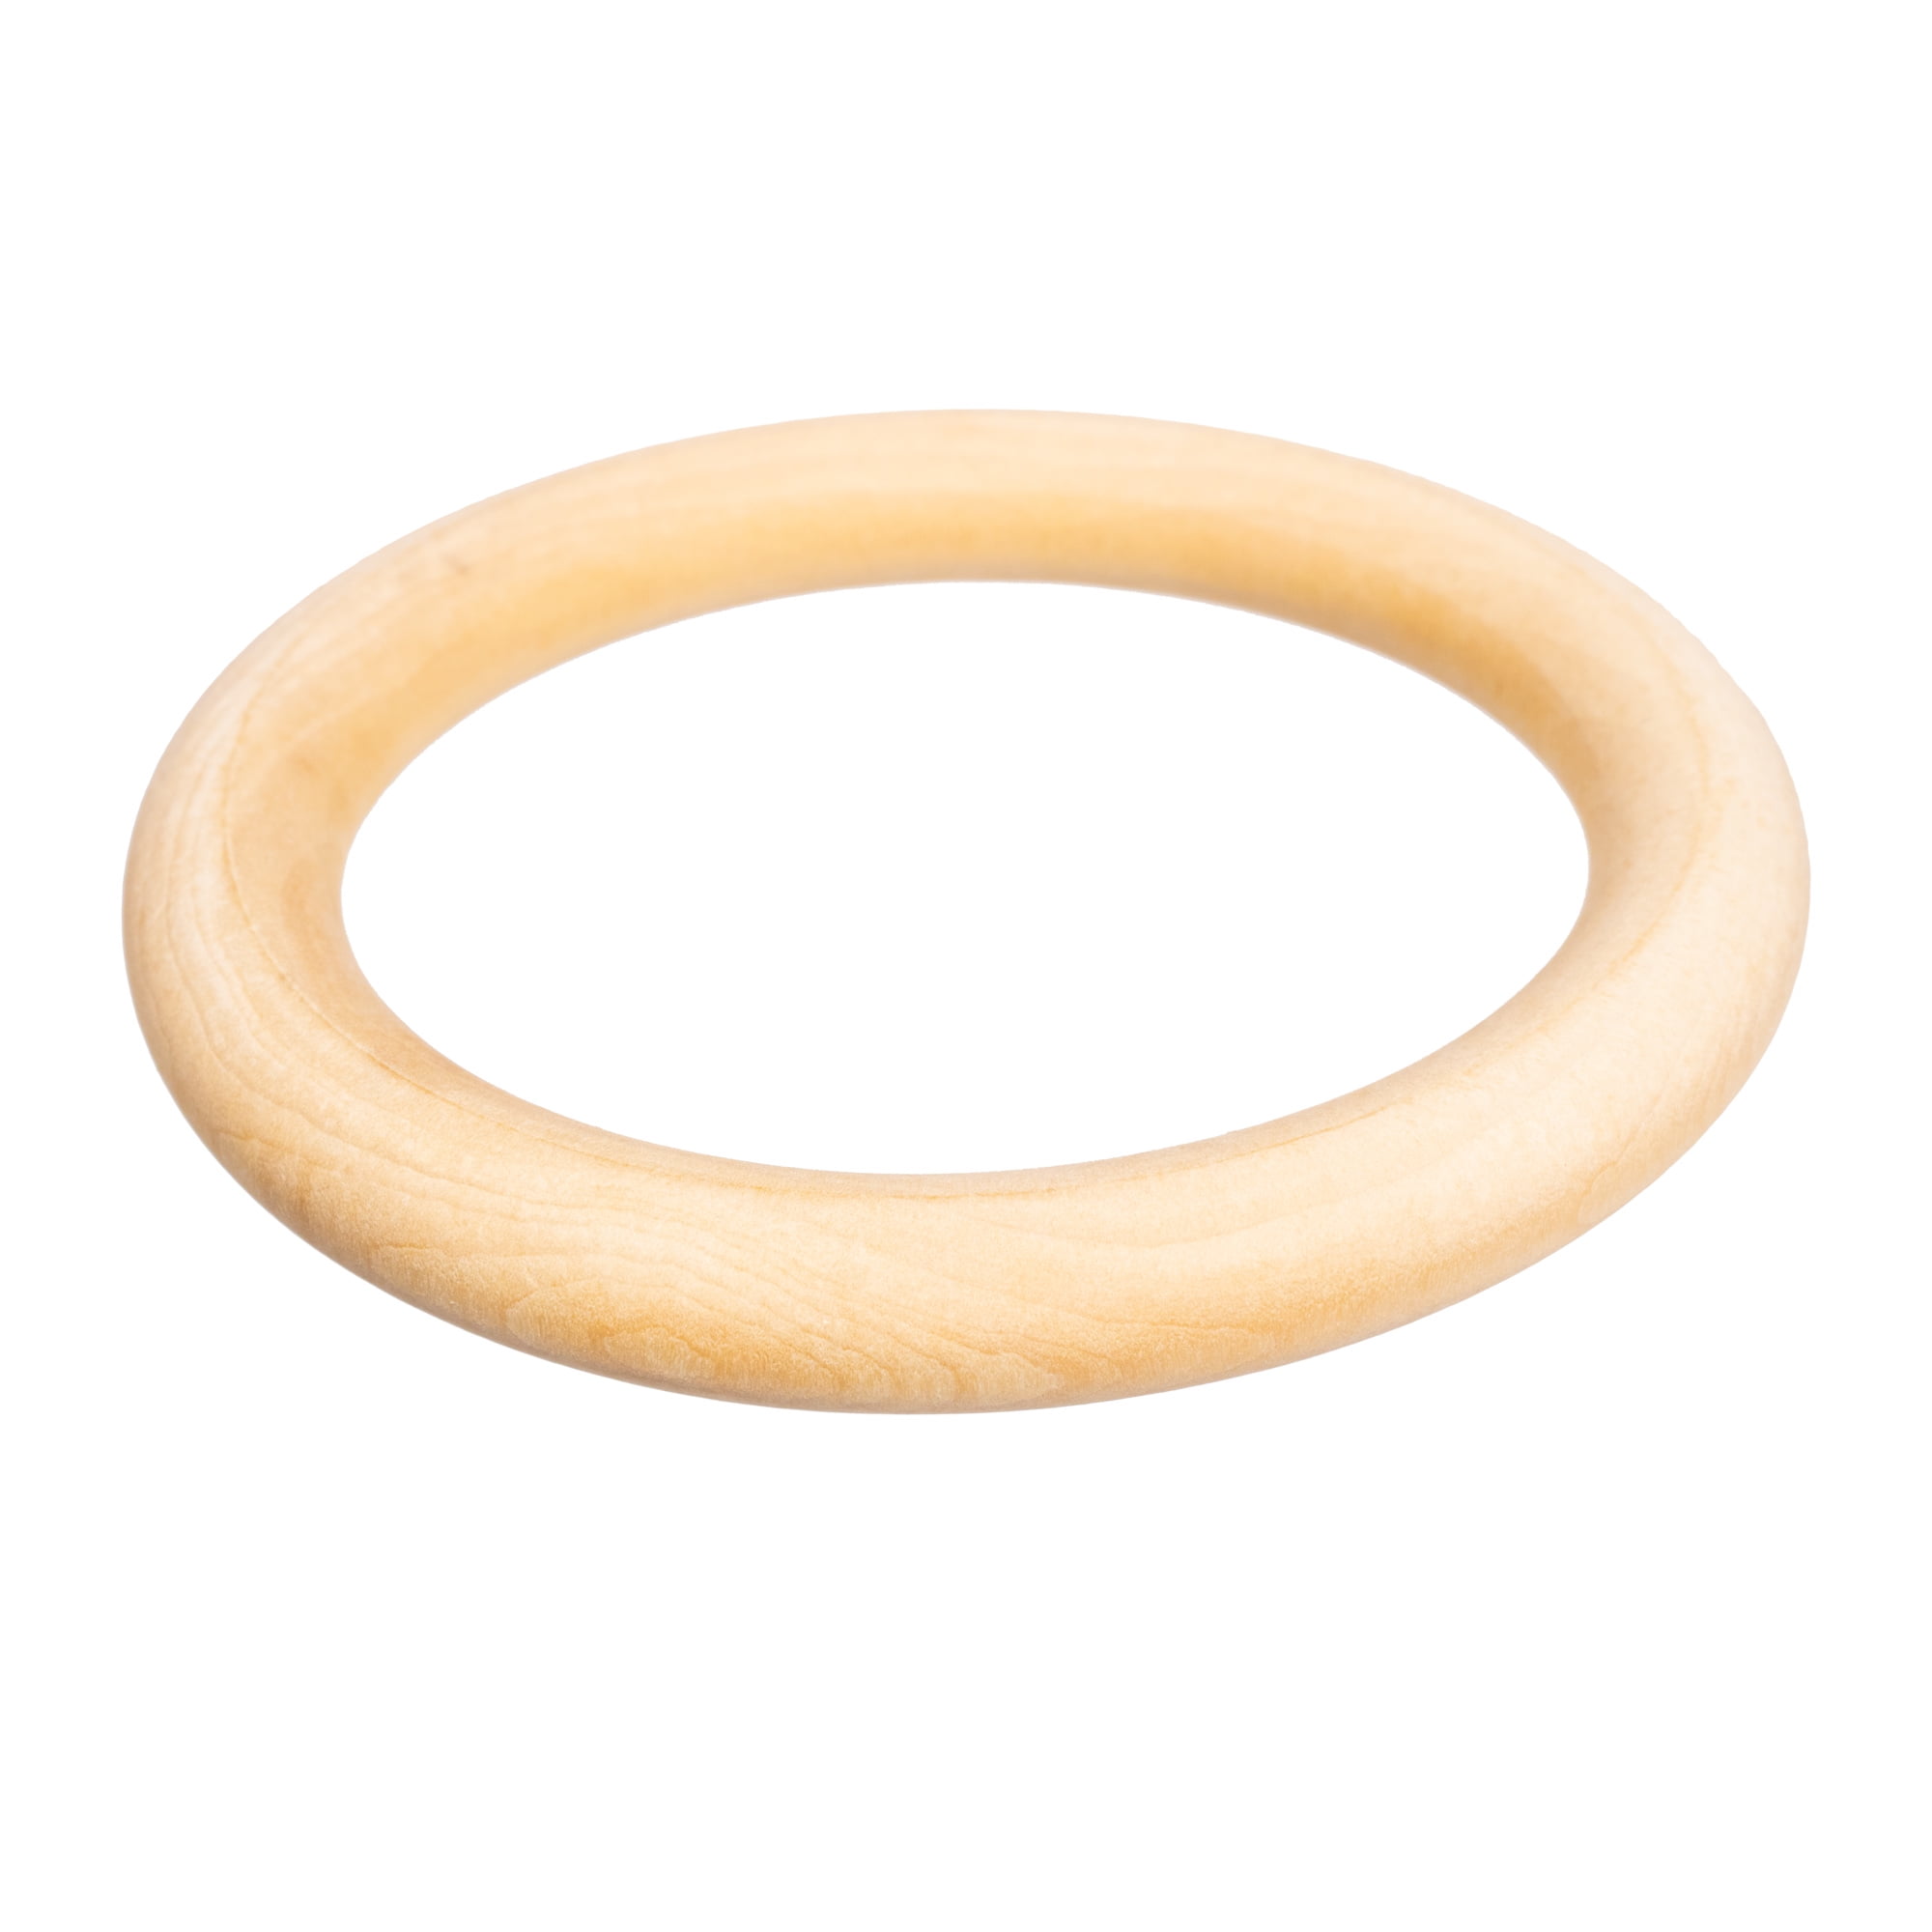 Wooden Rings for Crafts 100Pcs Natural Wood Rings Unfinished Wood Loop -  Bed Bath & Beyond - 38456676